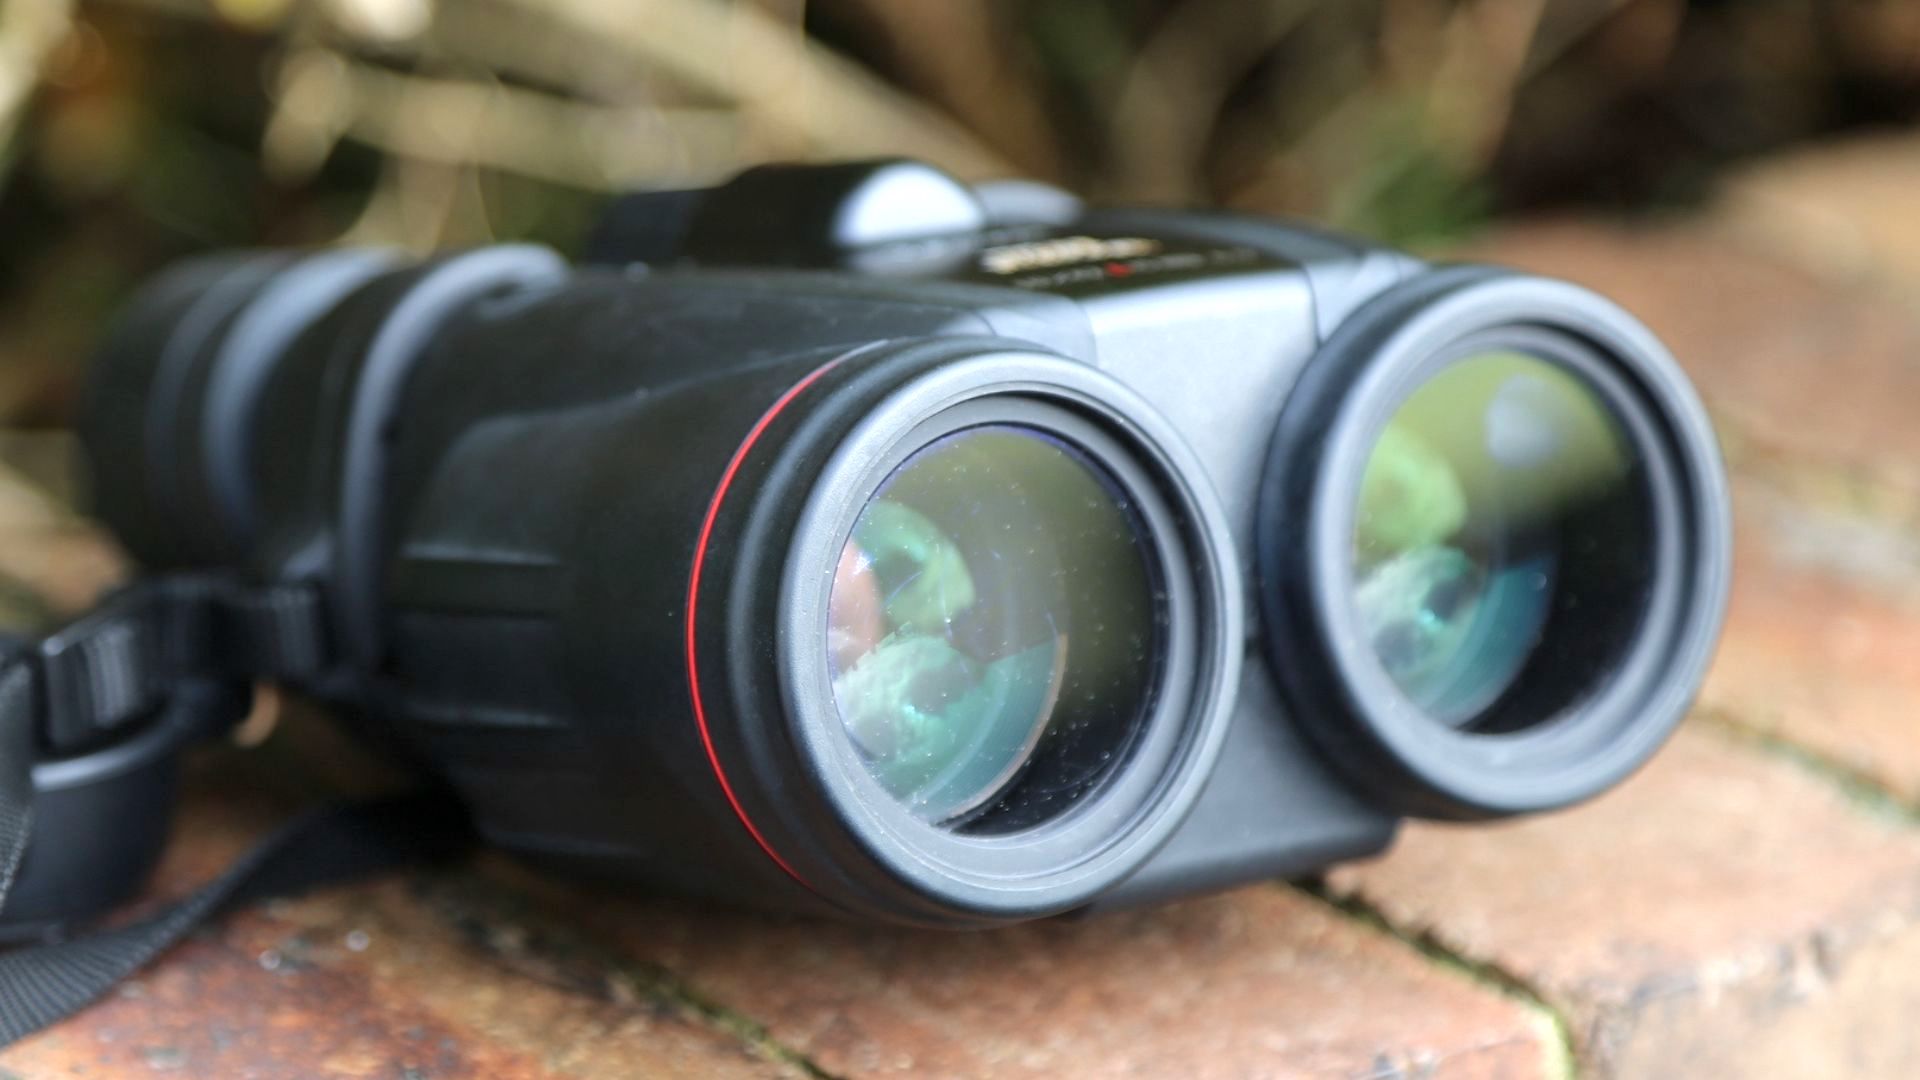 Canon 10x42L IS WP review: image shows Canon 10x42L IS WP binoculars